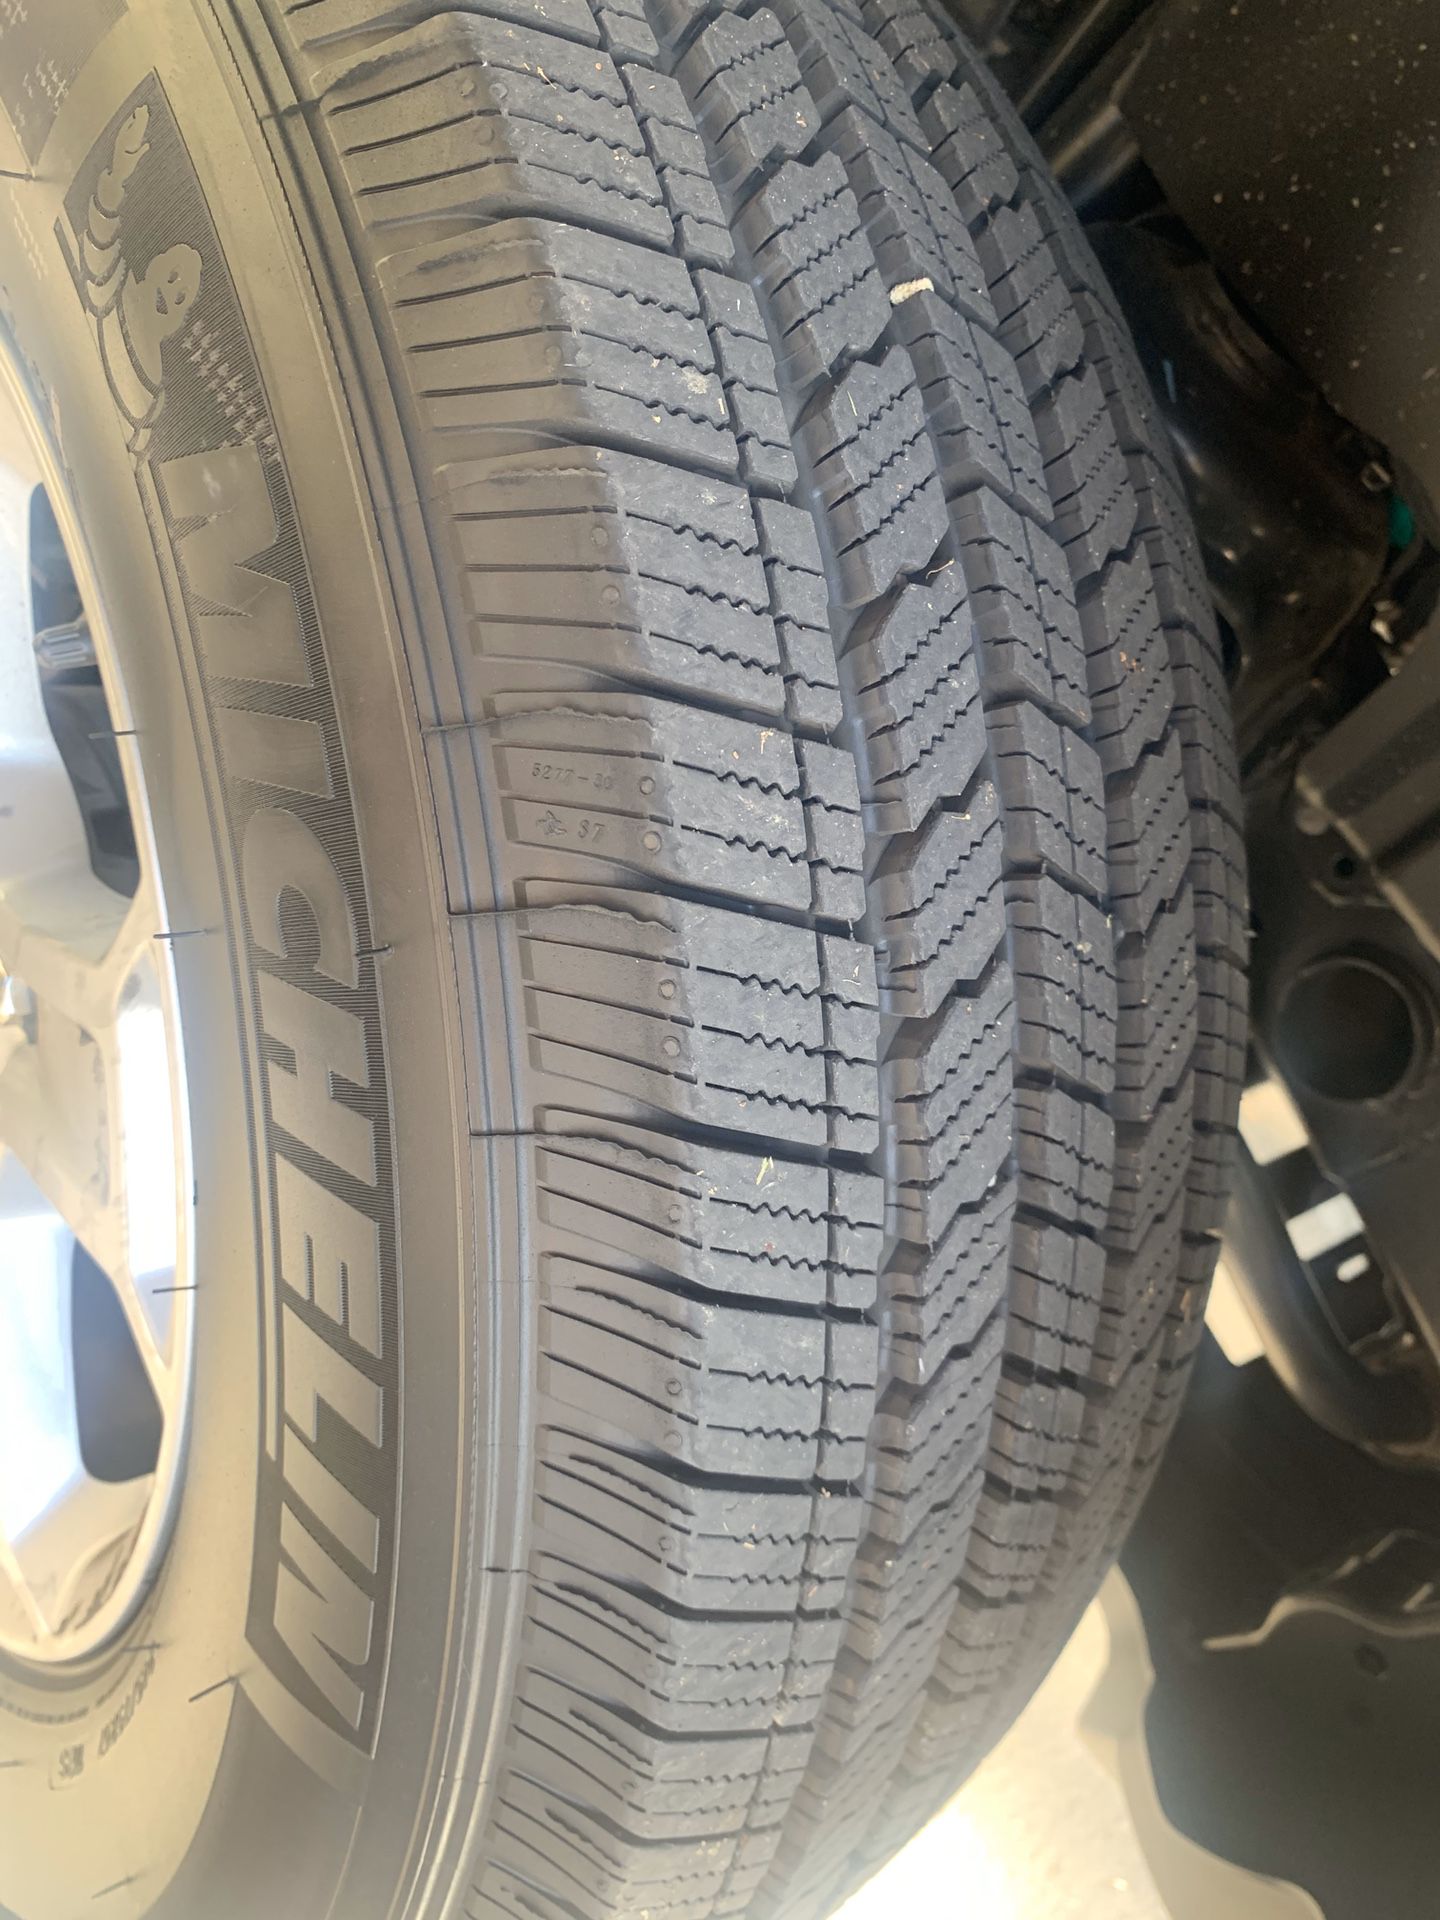 Brand new michelin tires! (Wheels and tires)